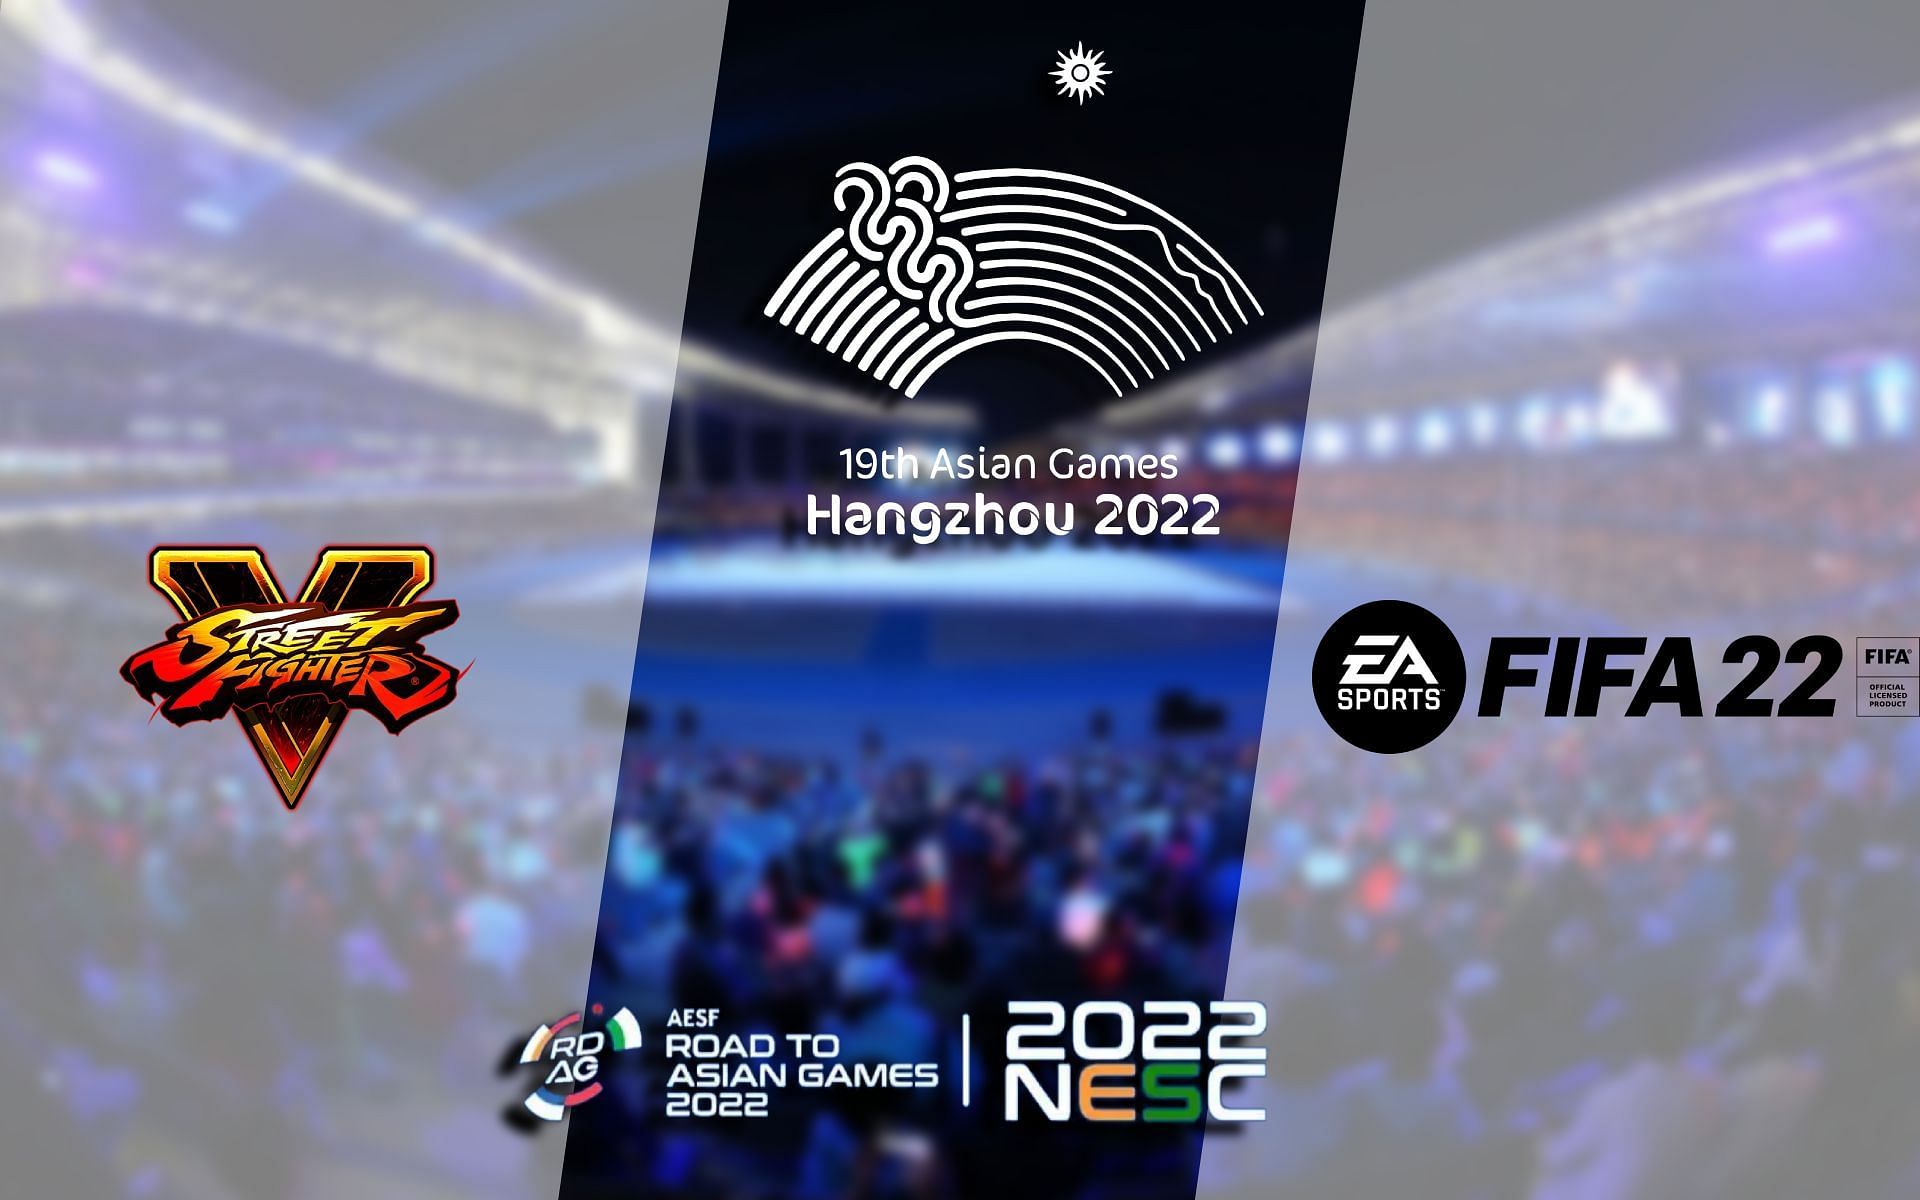 Indian Asian Games 2022 team for Street Fighter V and FIFA 22 confirmed via NESC (Image by Sportskeeda)